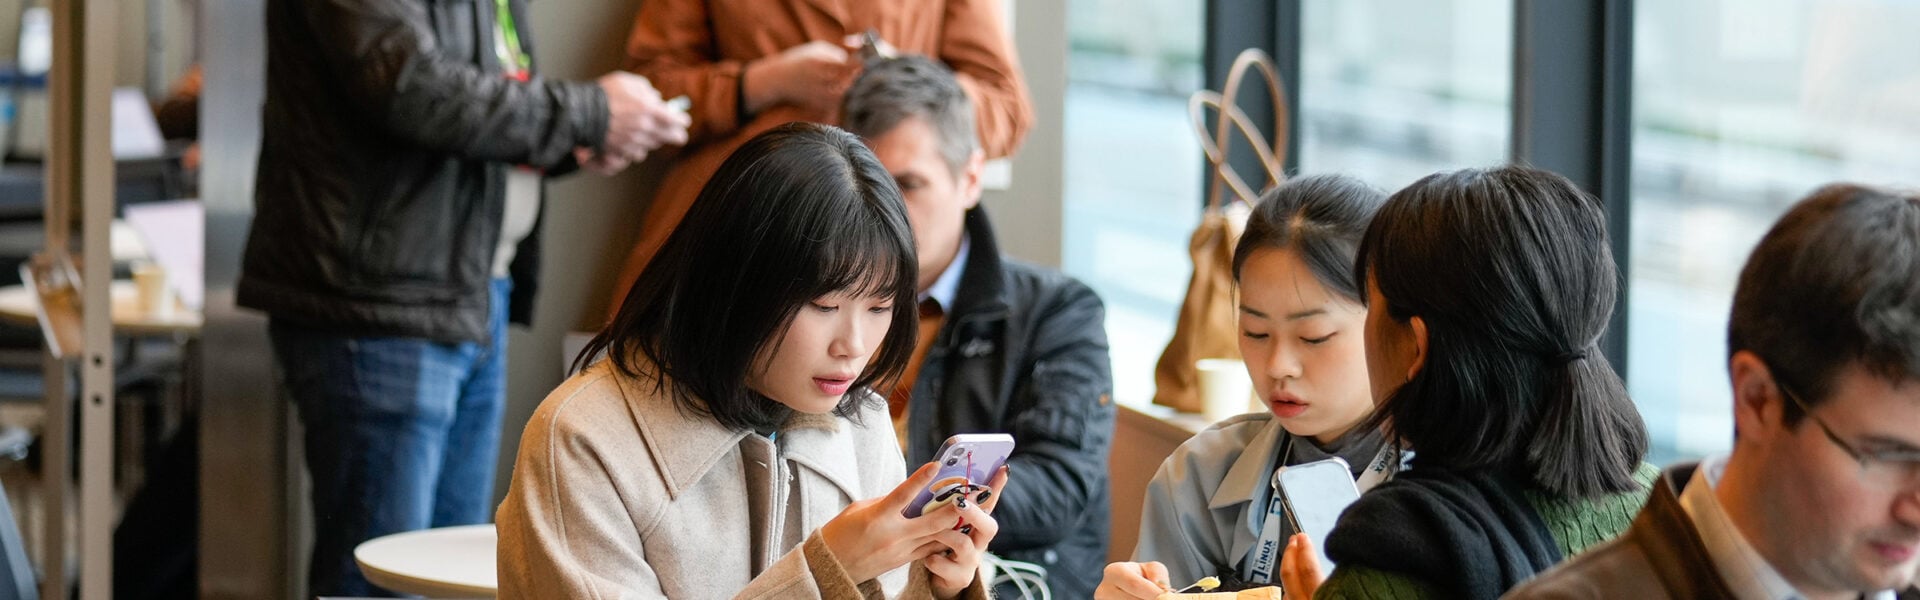 Three women seated at a table looking up information on their phones.